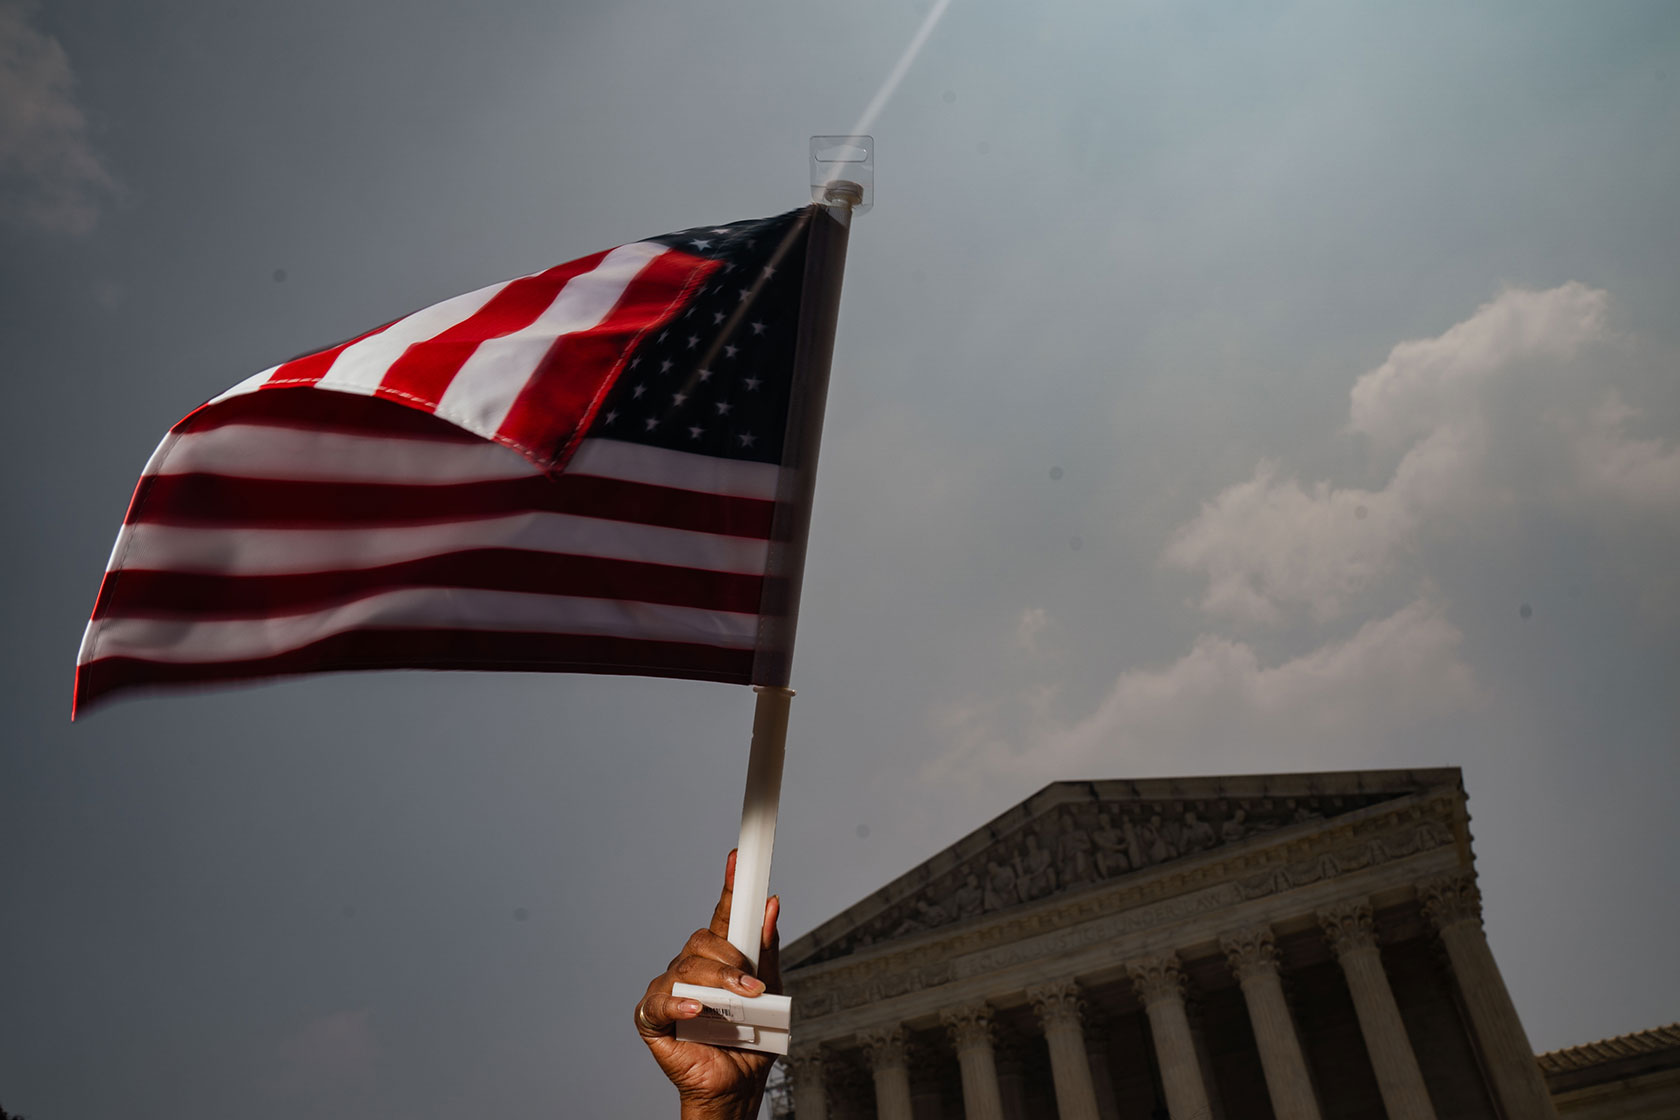 Photo shows a hand holding a small American flag, with the Supreme Court building against a cloudy sky in the background